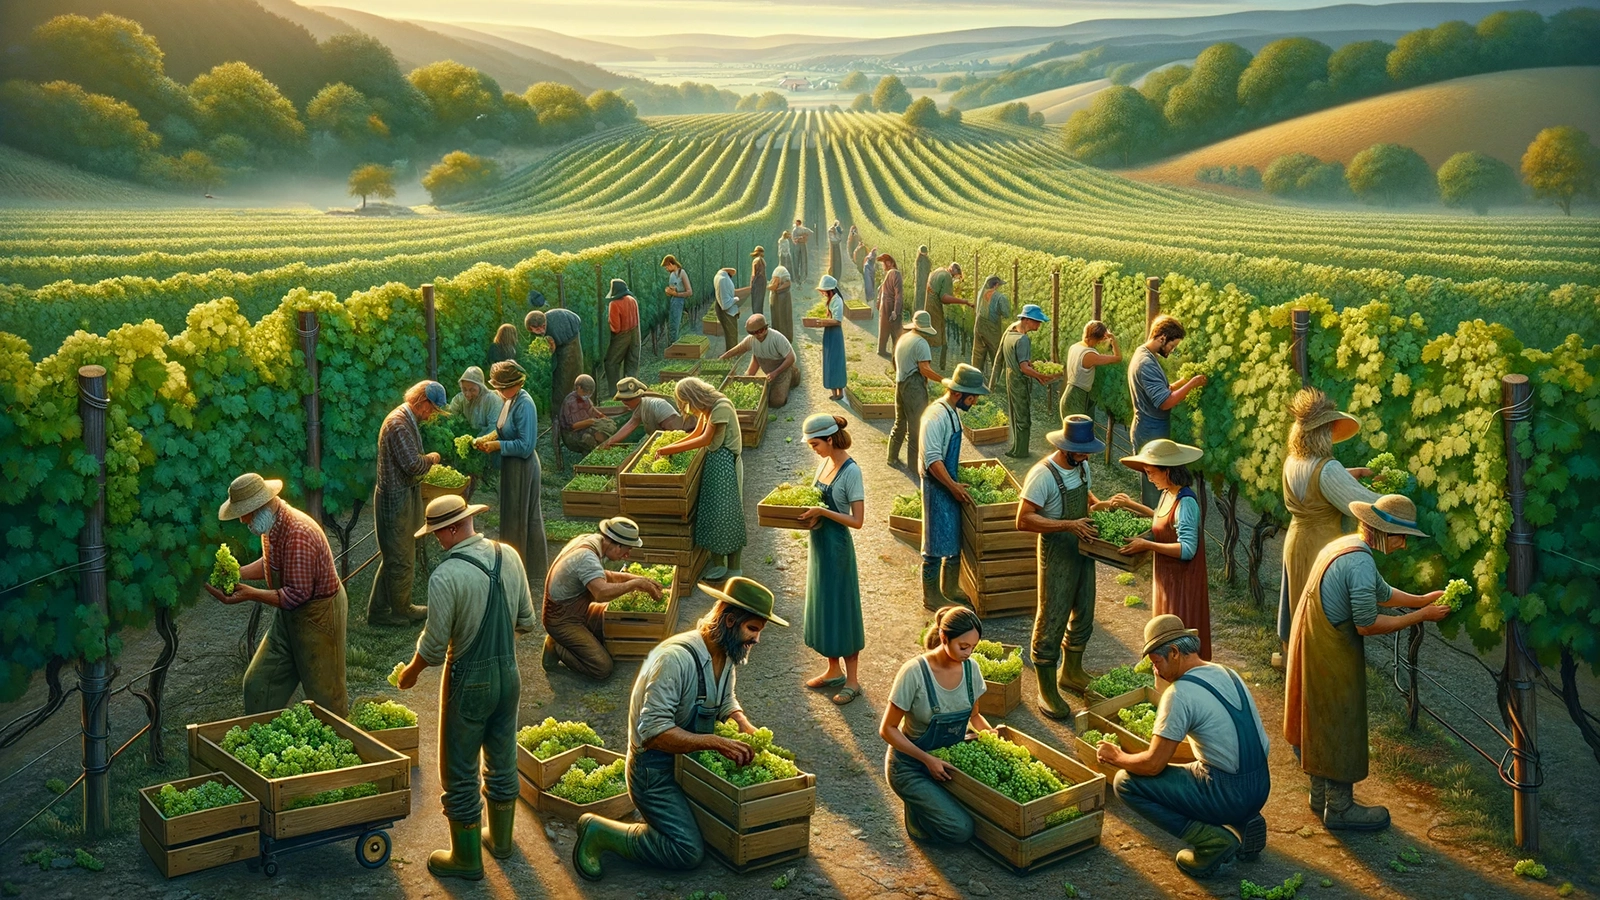 A vibrant vineyard scene at sunrise with workers of diverse genders and ethnicities harvesting green grapes. They carefully place the grapes into shallow wooden crates. The vineyard rows stretch toward rolling hills in the background, bathed in the soft golden light of early morning.